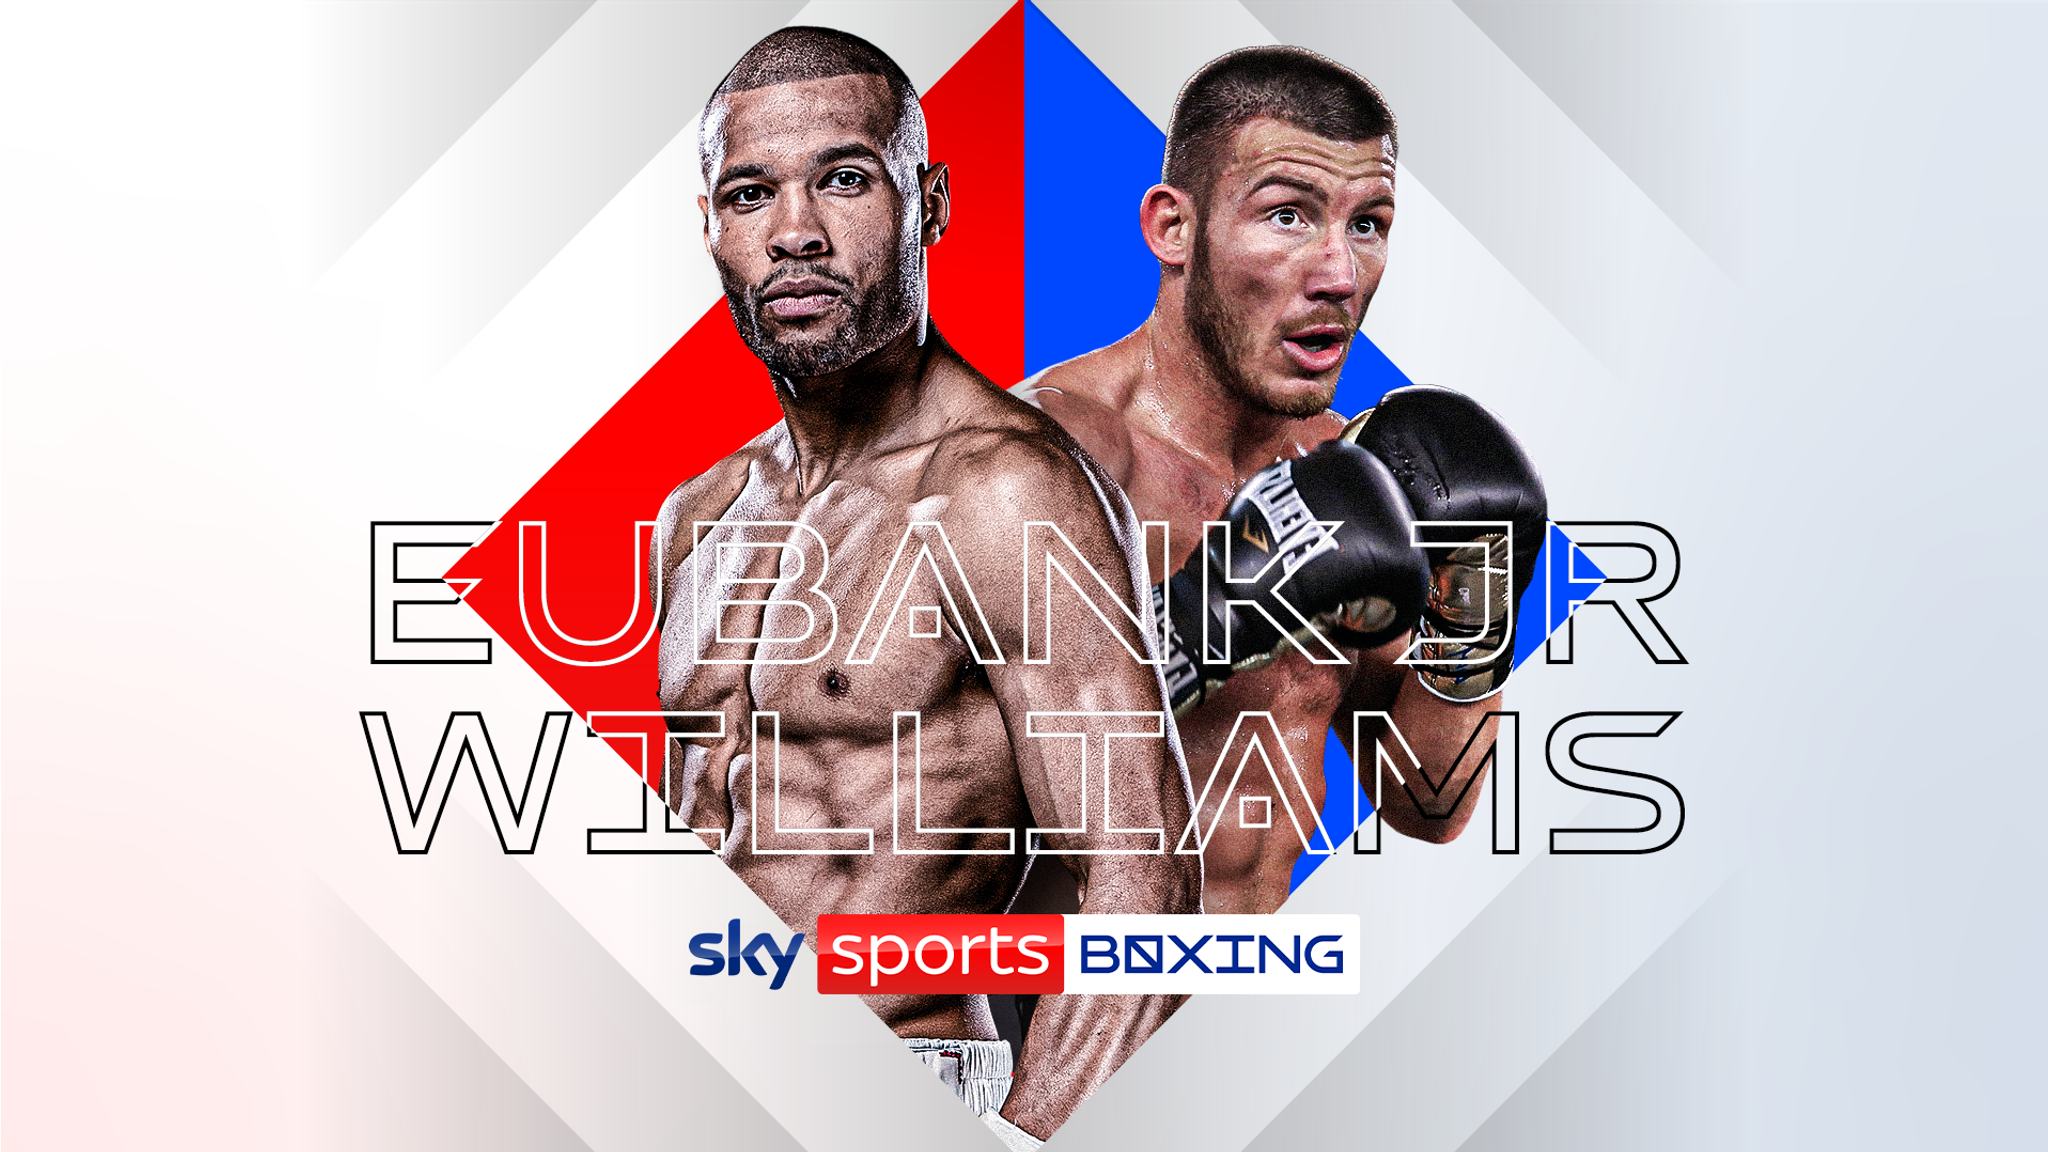 Chris Eubank Jr settles bitter rivalry with Liam Williams in a huge British battle on December 11 live on Sky Sports Boxing News Sky Sports